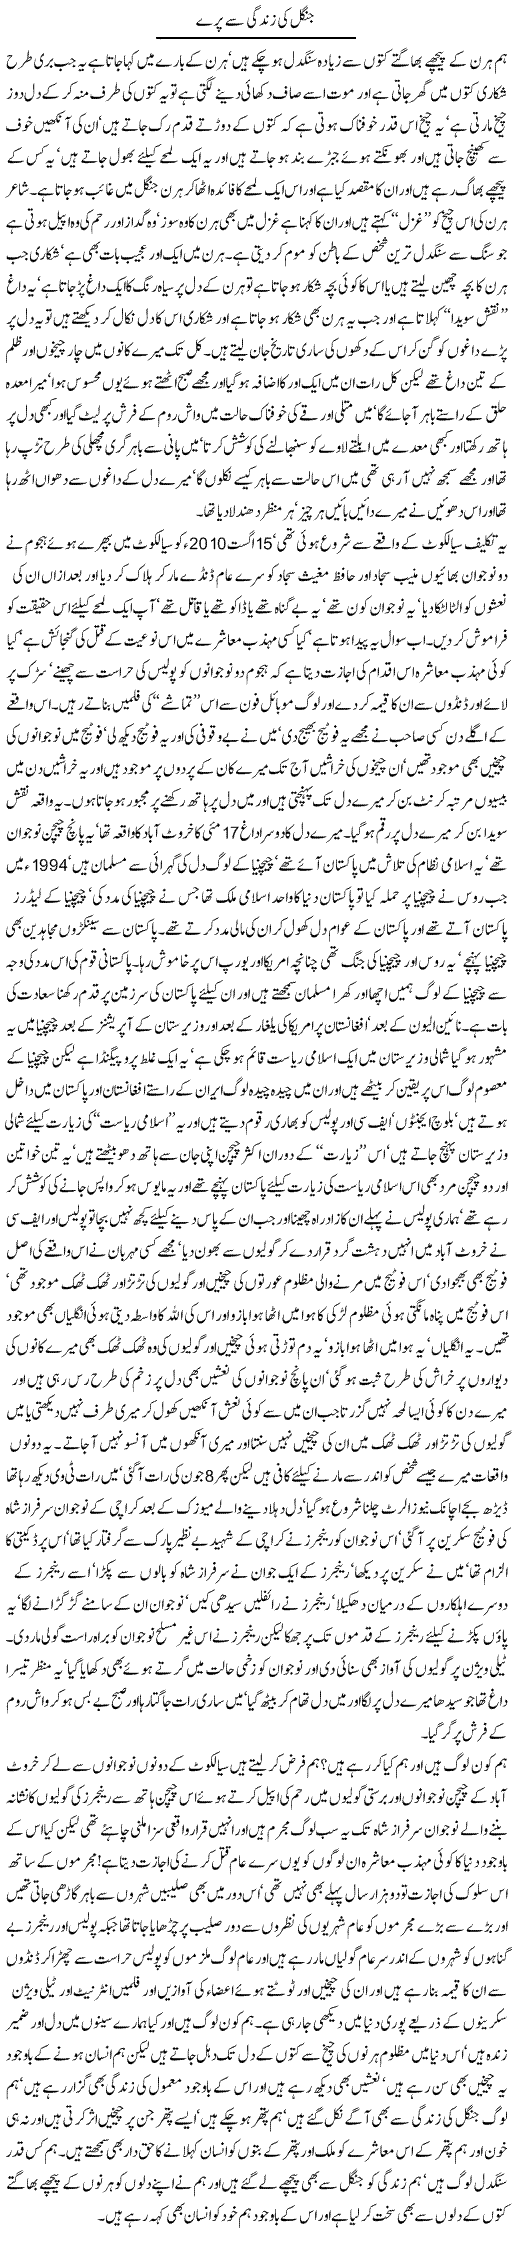 Worse Situation in Pakistan Express Column Javed Chaudhry 10 June 2011